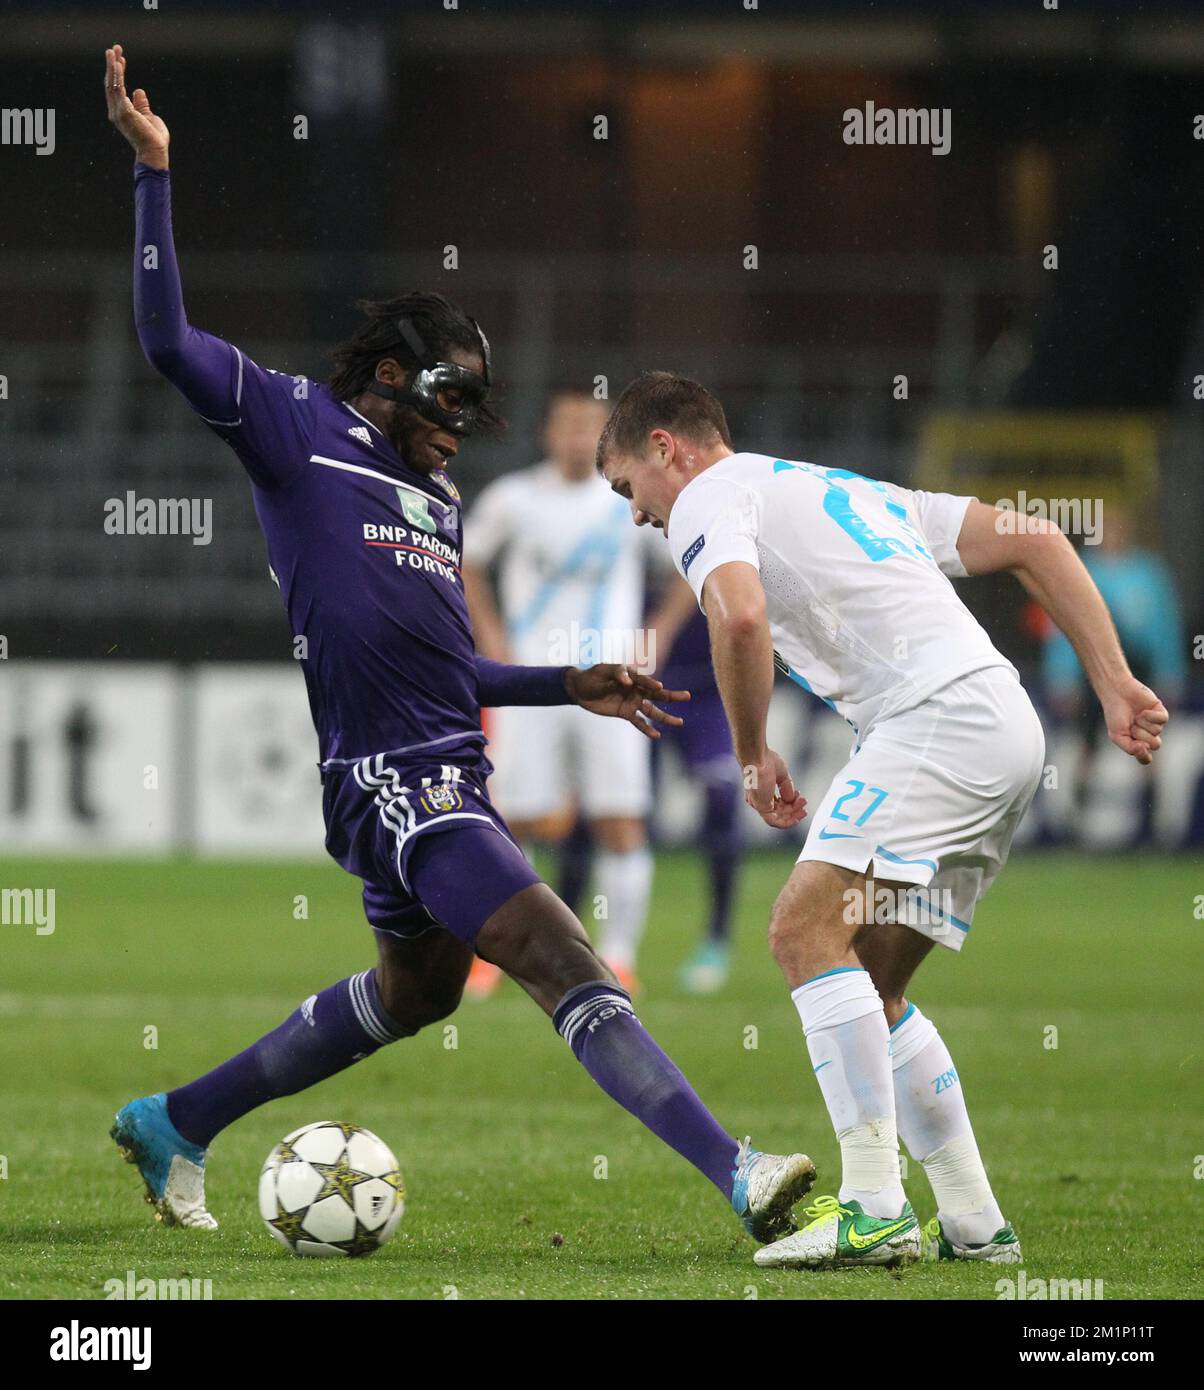 20121106 - BRUSSELS, BELGIUM: Anderlecht's Dieumerci Mbokani and Zenit's Igor Denisov fight for the ball during the match between Belgian first division soccer team RSC Anderlecht and Russian team FC Zenit Saint Petersburg in group C of the UEFA Champions League tournament, Tuesday 06 November 2012 in Brussels. BELGA PHOTO VIRGINIE LEFOUR Stock Photo